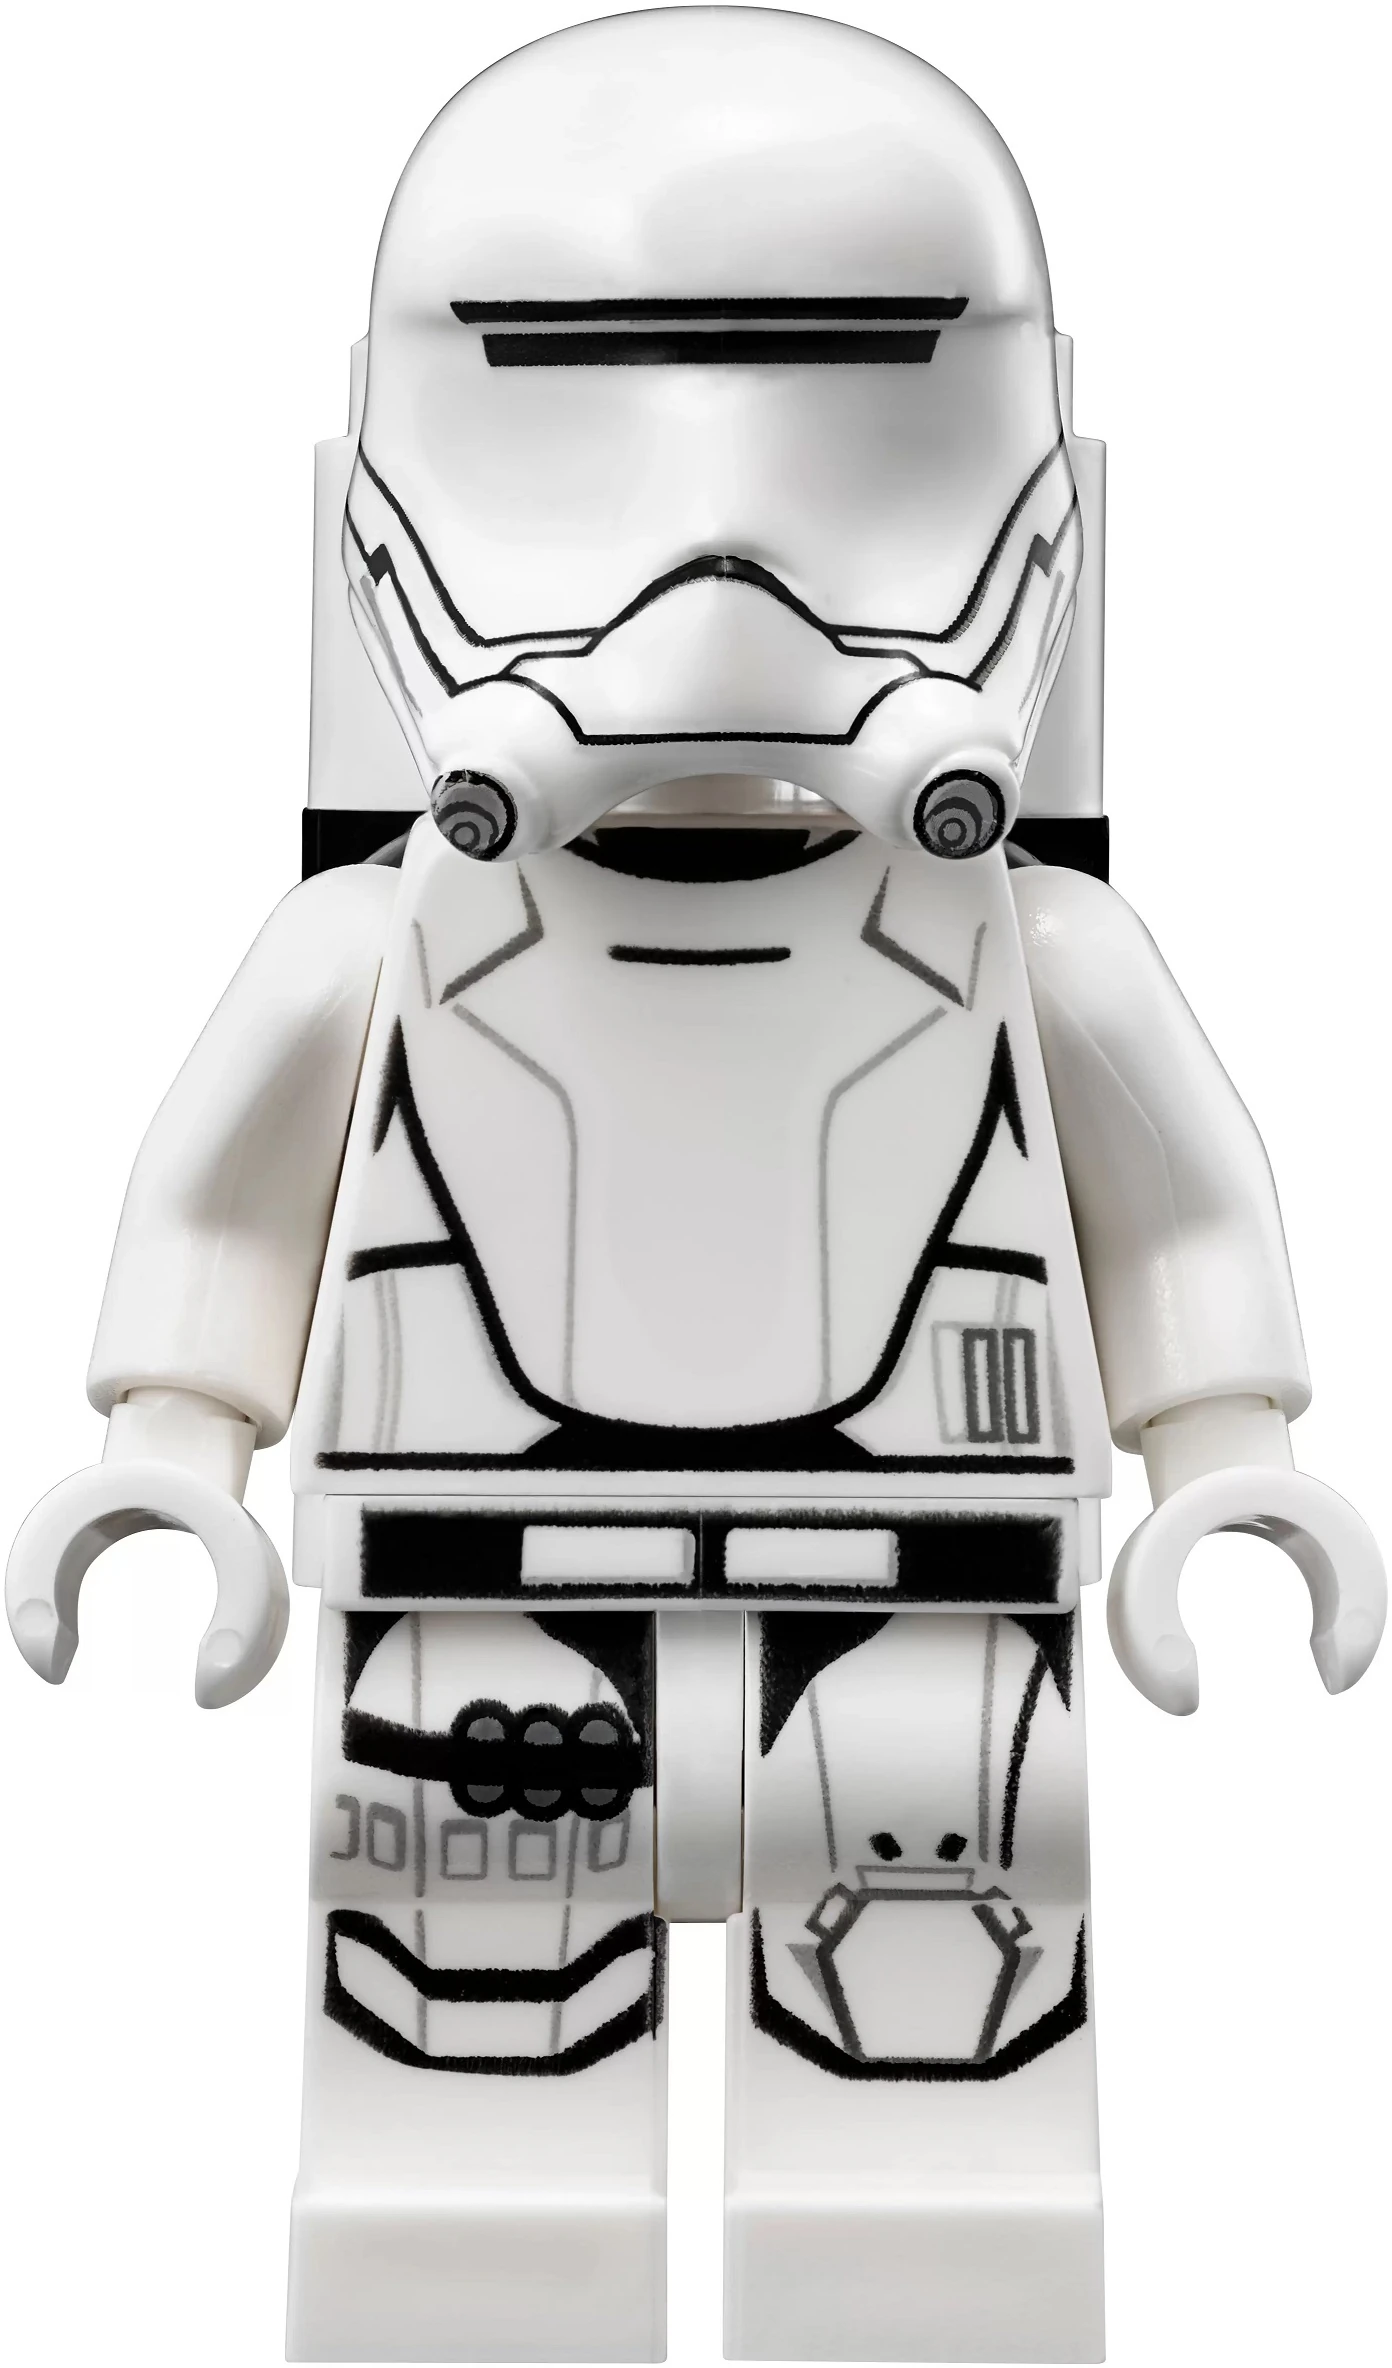 lego first order stormtrooper minifigure